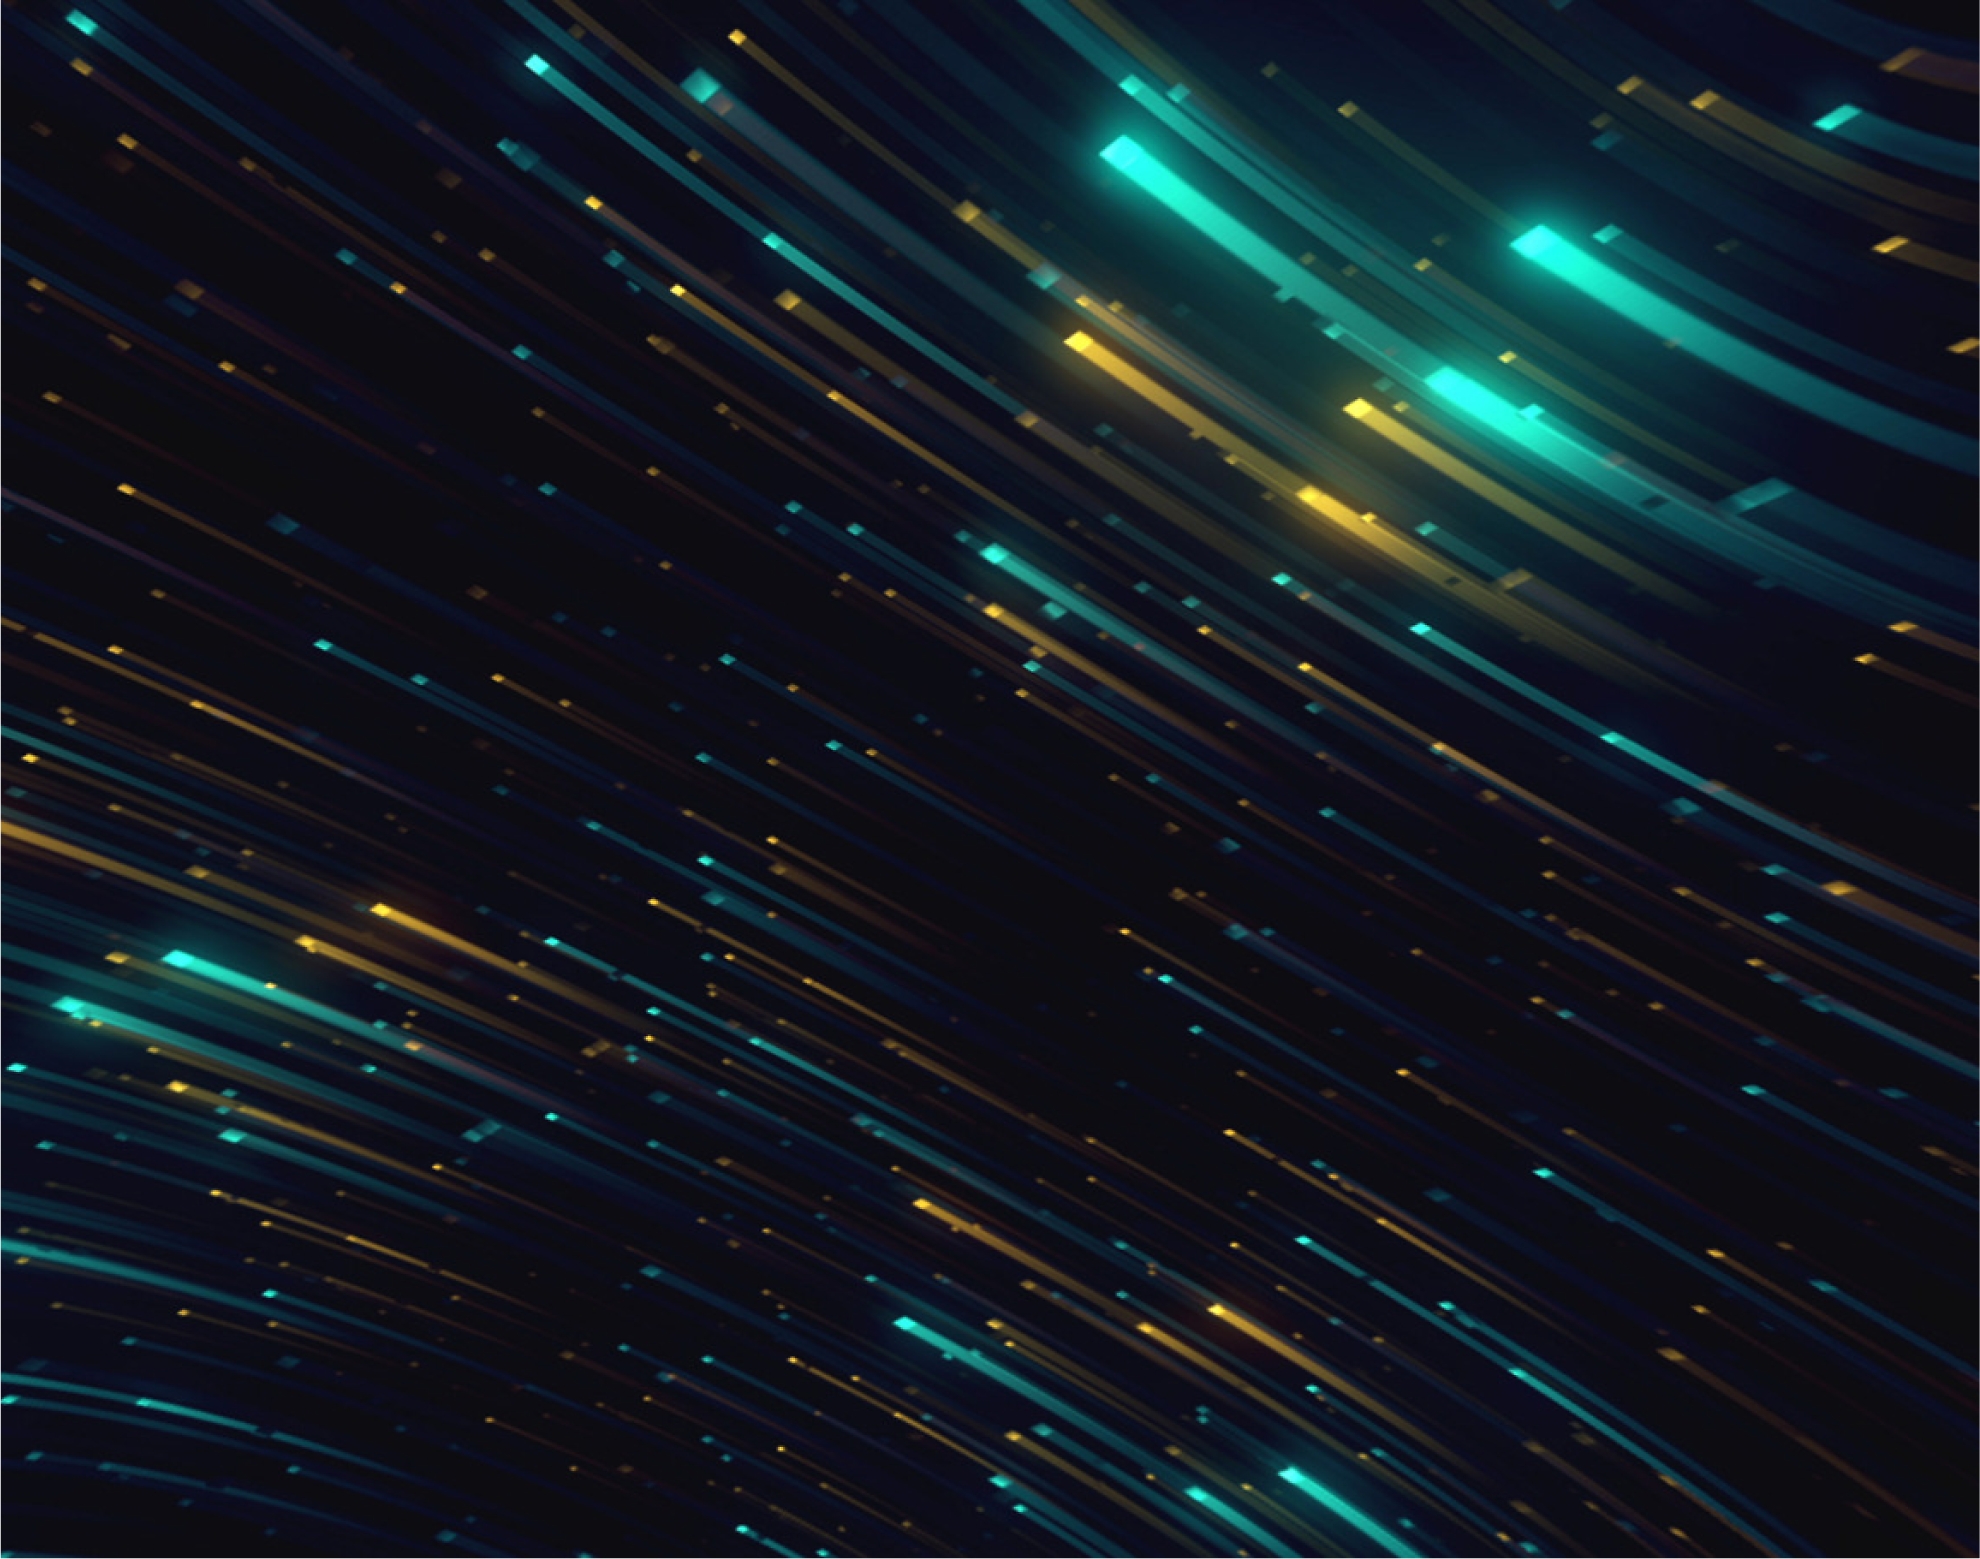 Abstract image showing streaks of blue and yellow lights against a dark background